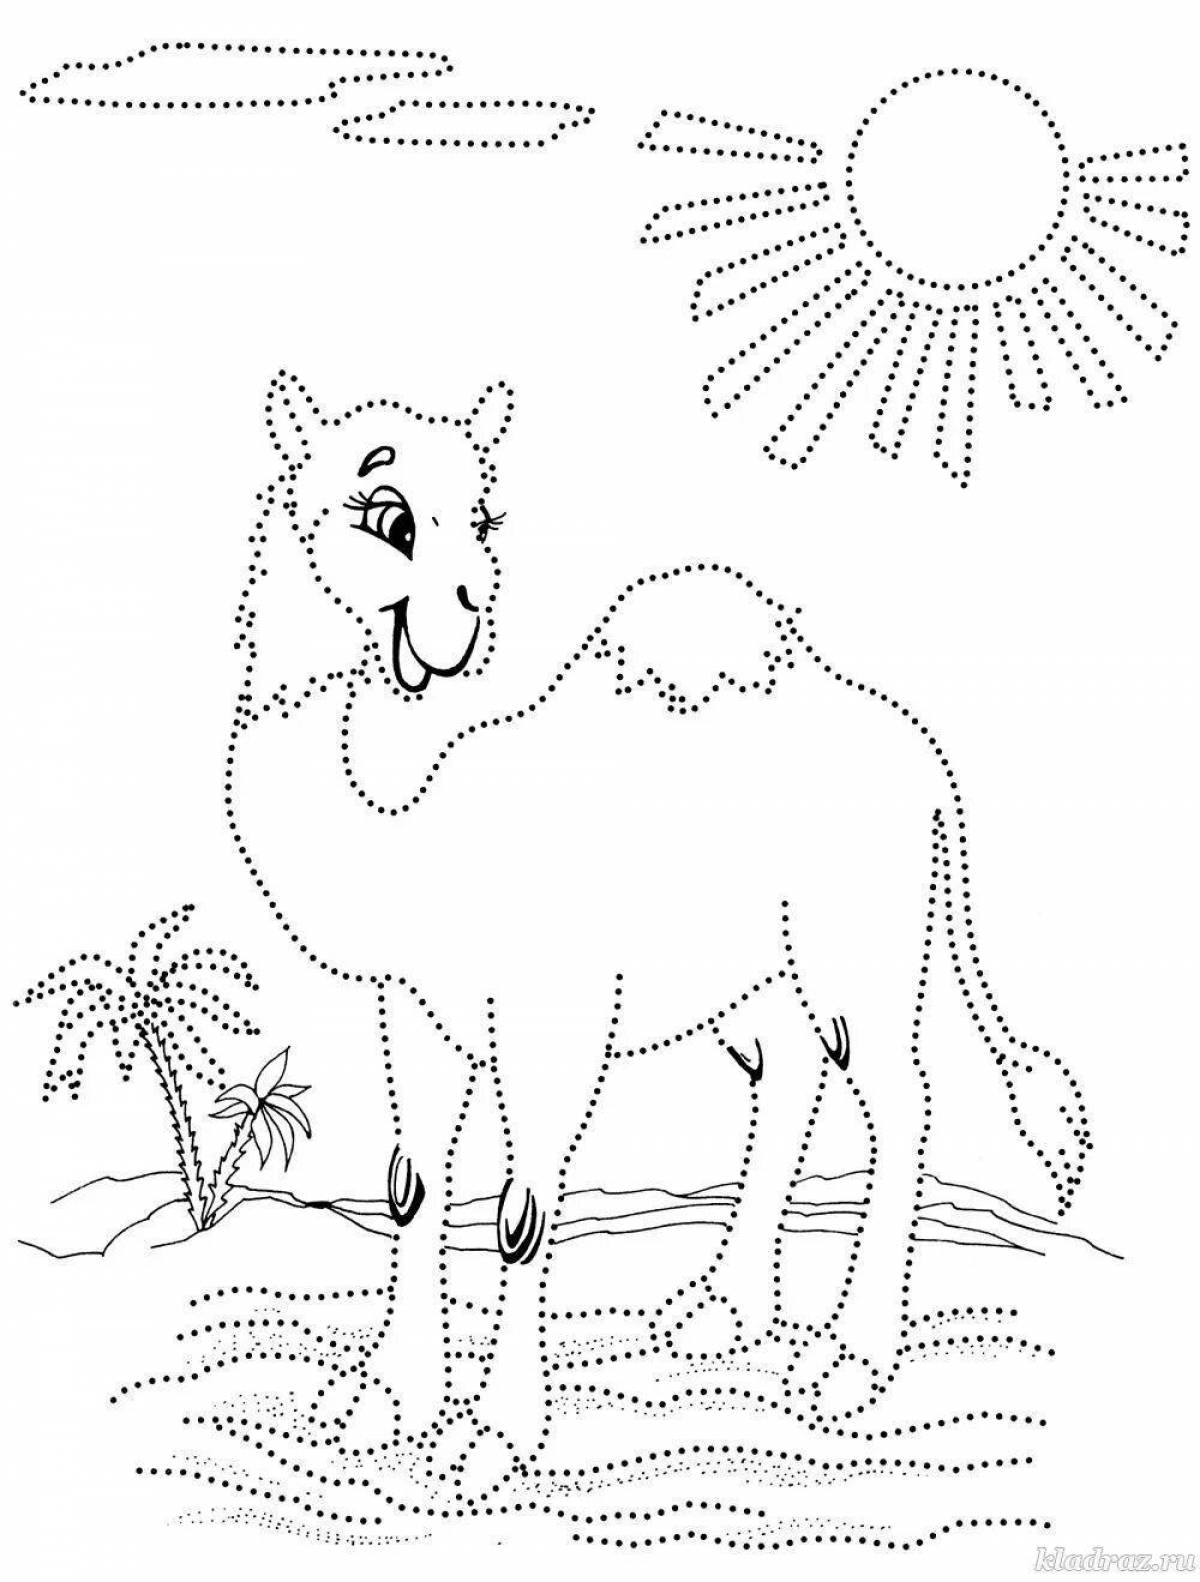 Crazy camel coloring book for 6-7 year olds